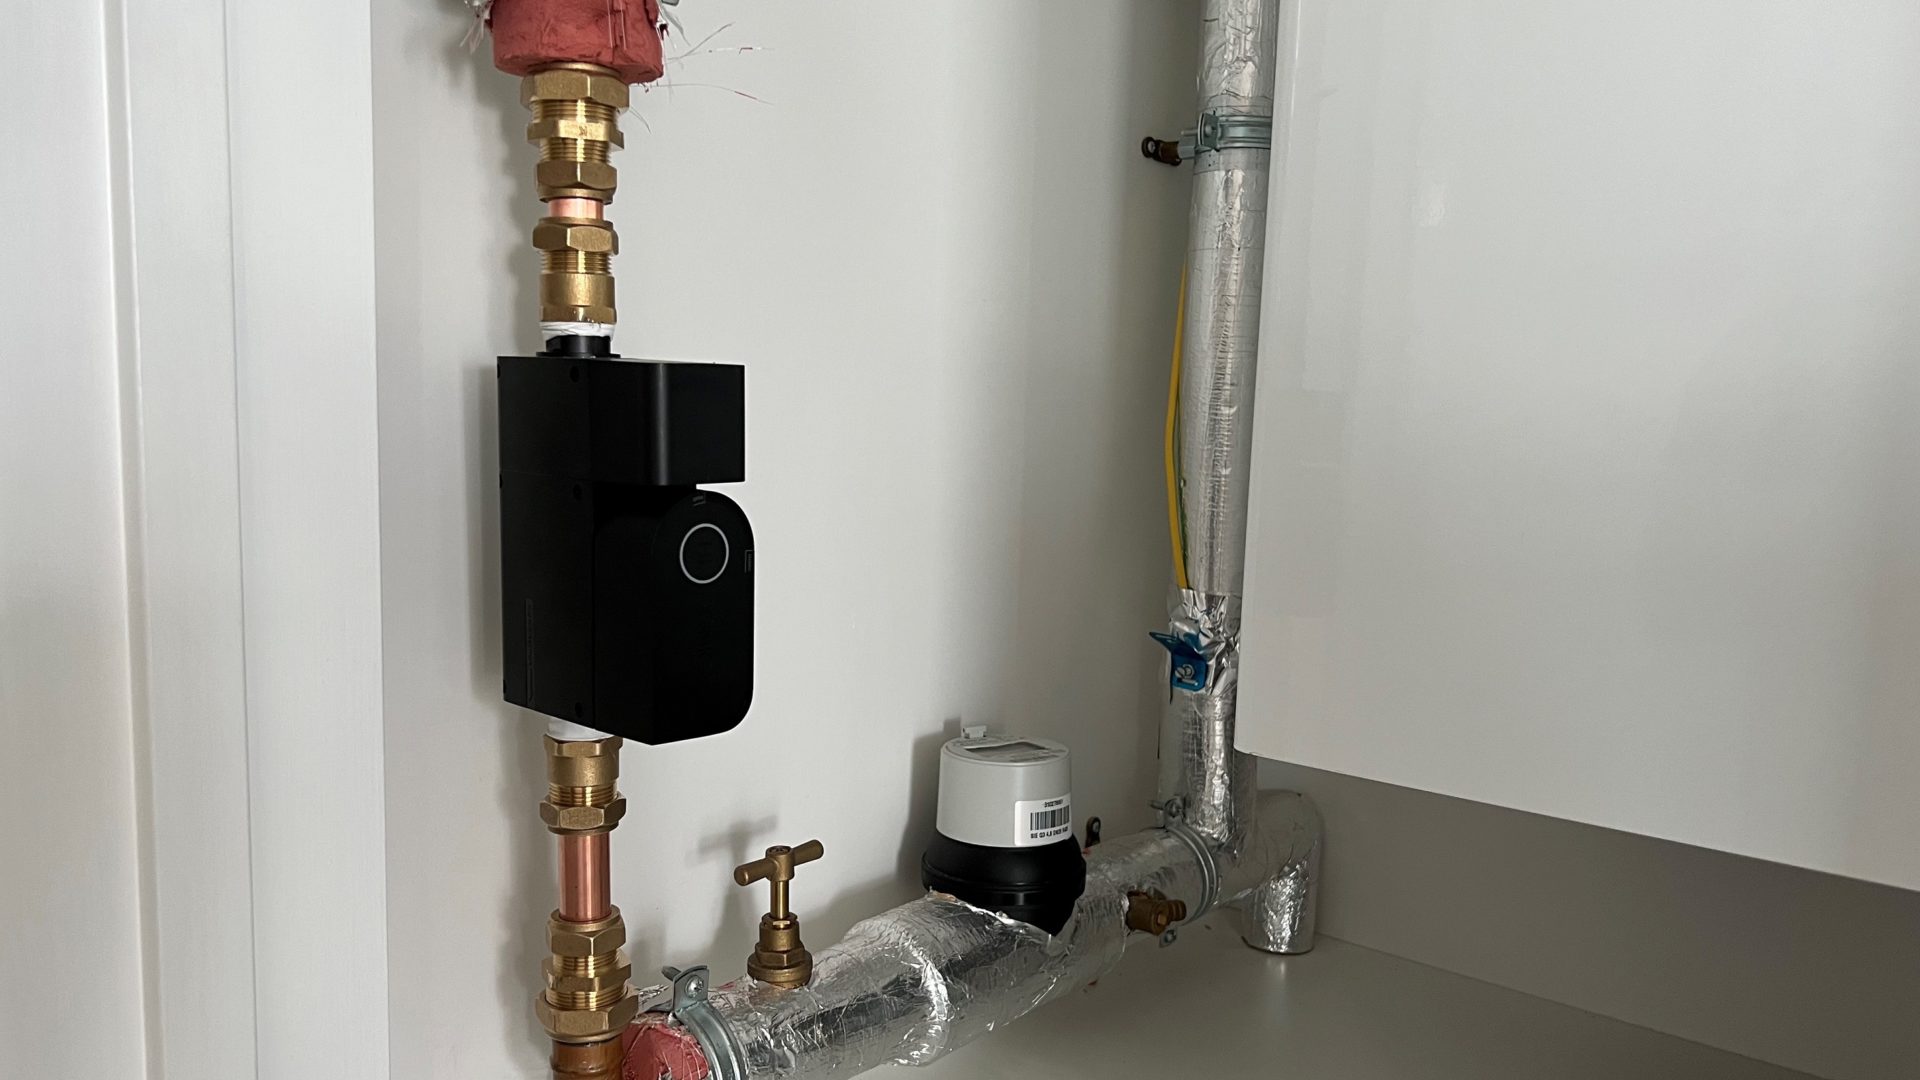 An image of plumbing pipes with a black gadget called the Sonic attached to it